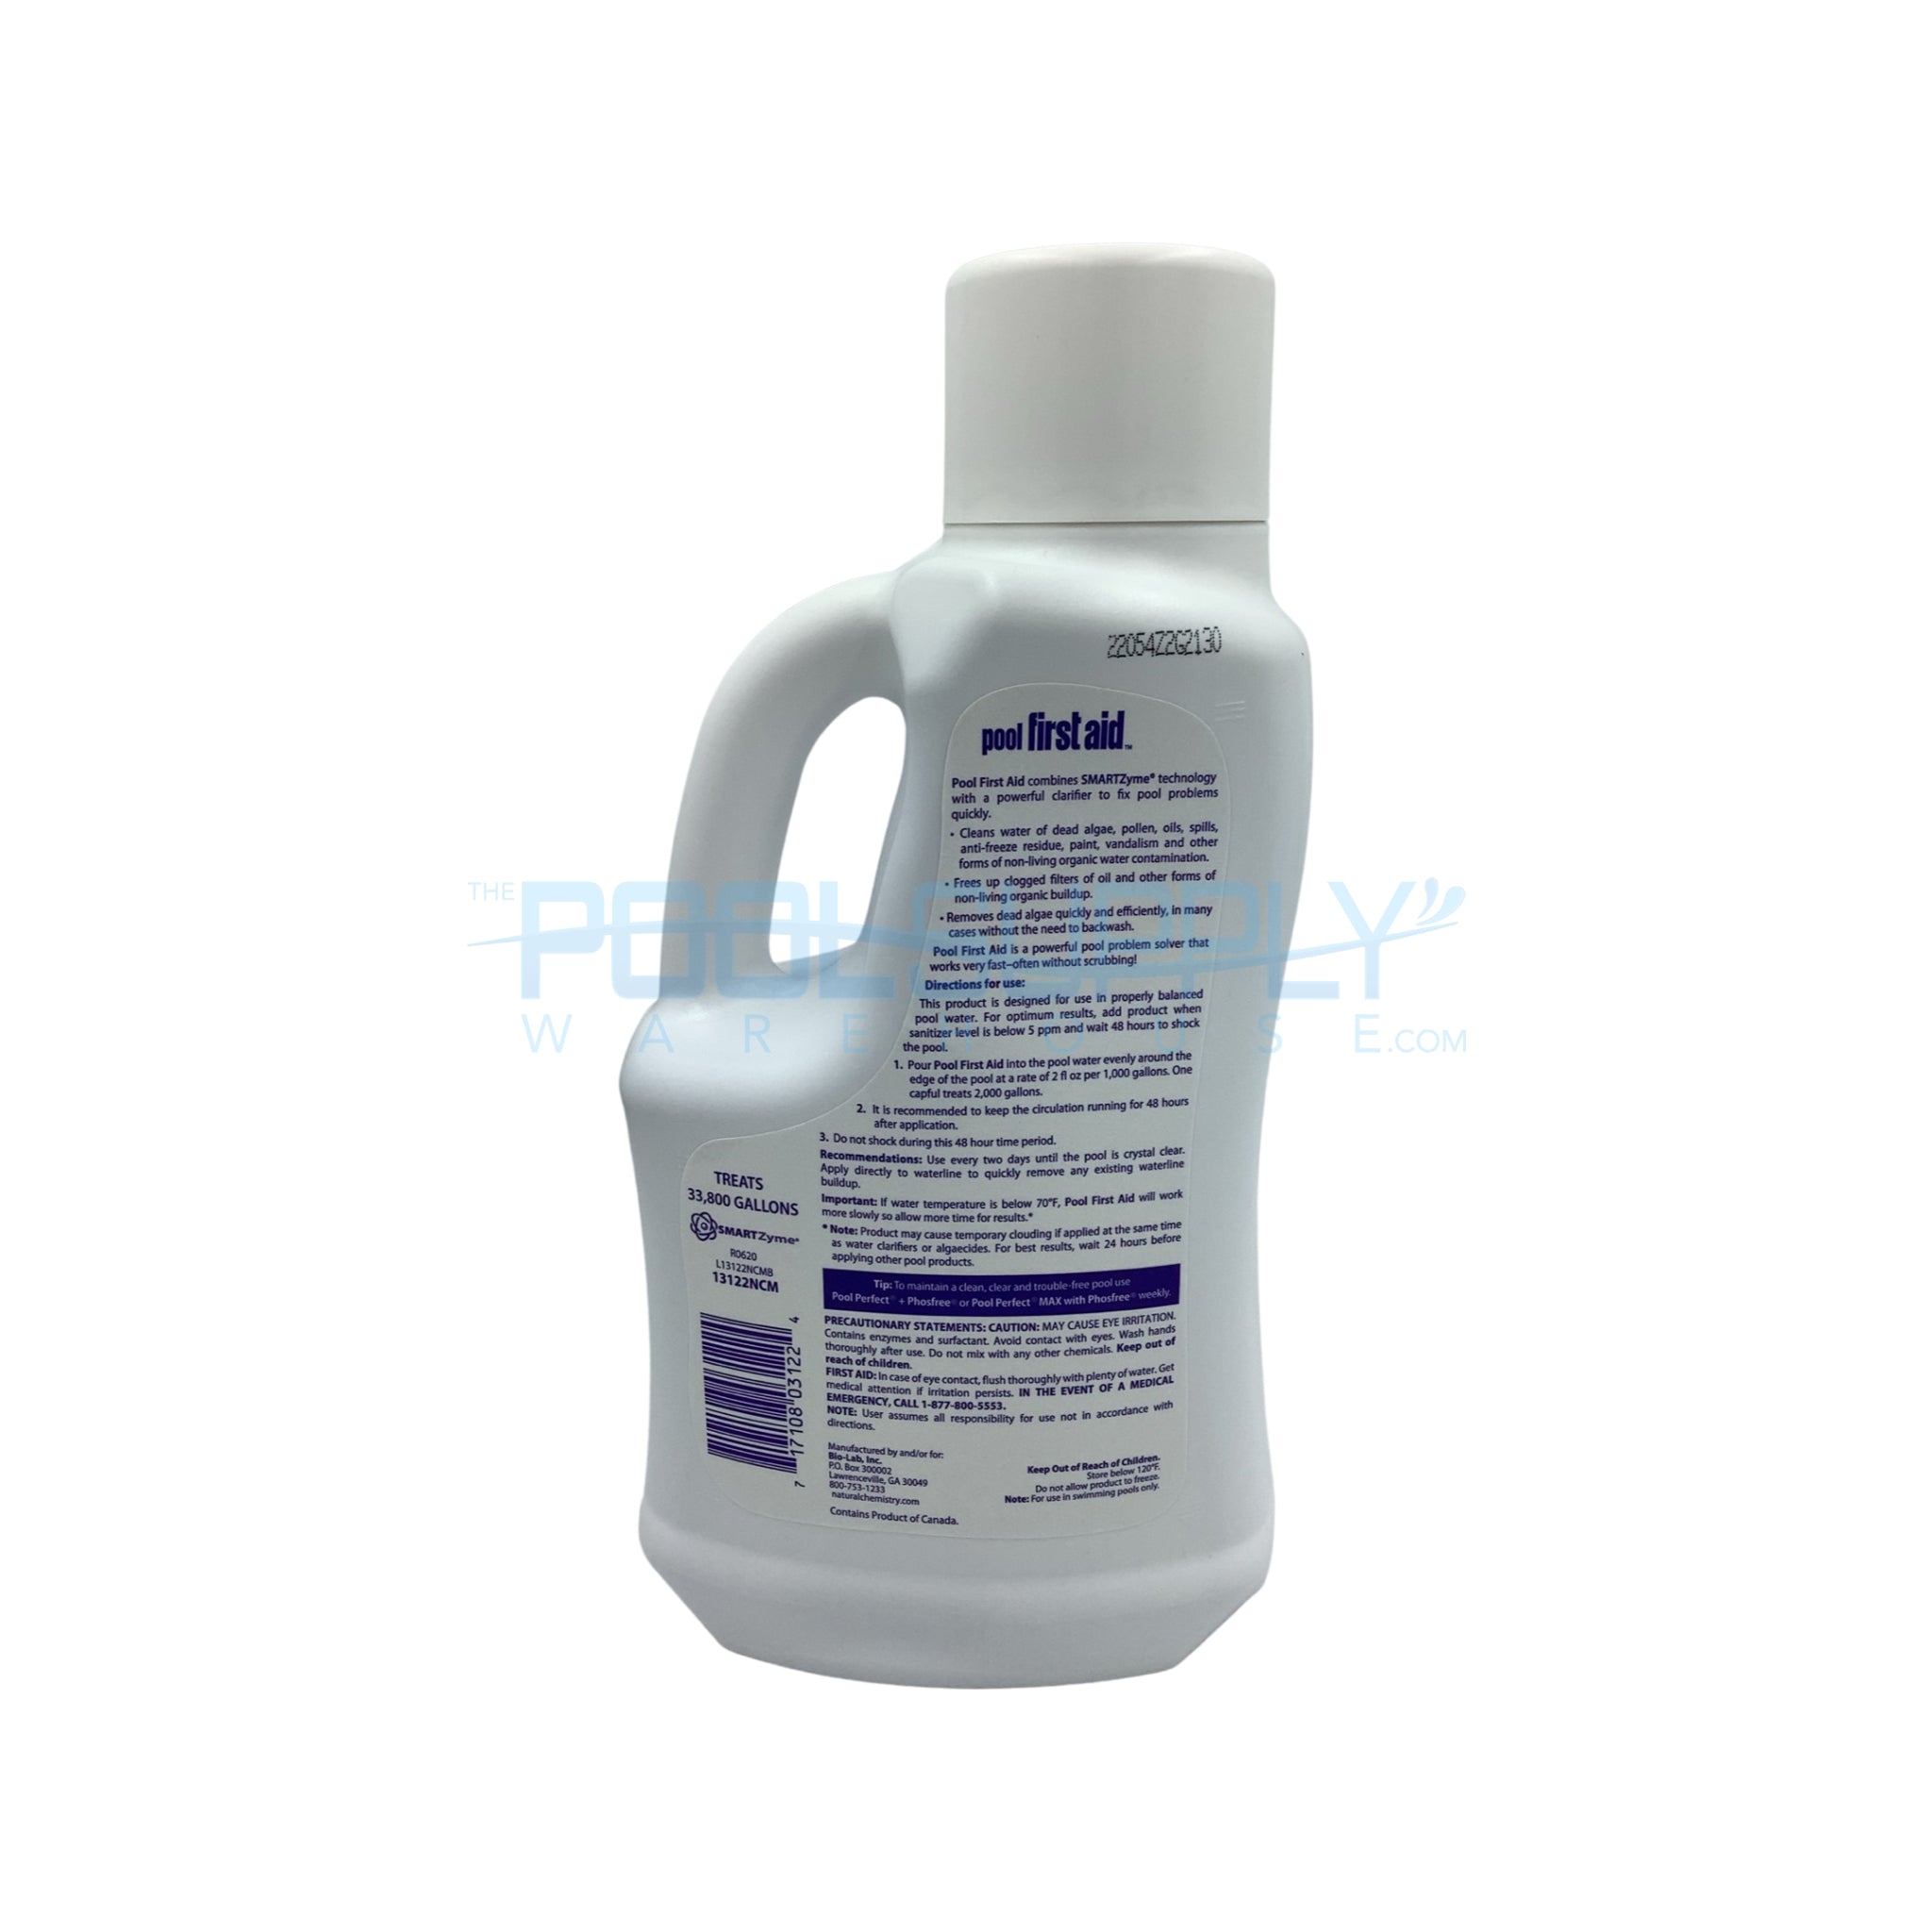 Natural Chemistry Pool First Aid 2L - 13122NCM - The Pool Supply Warehouse